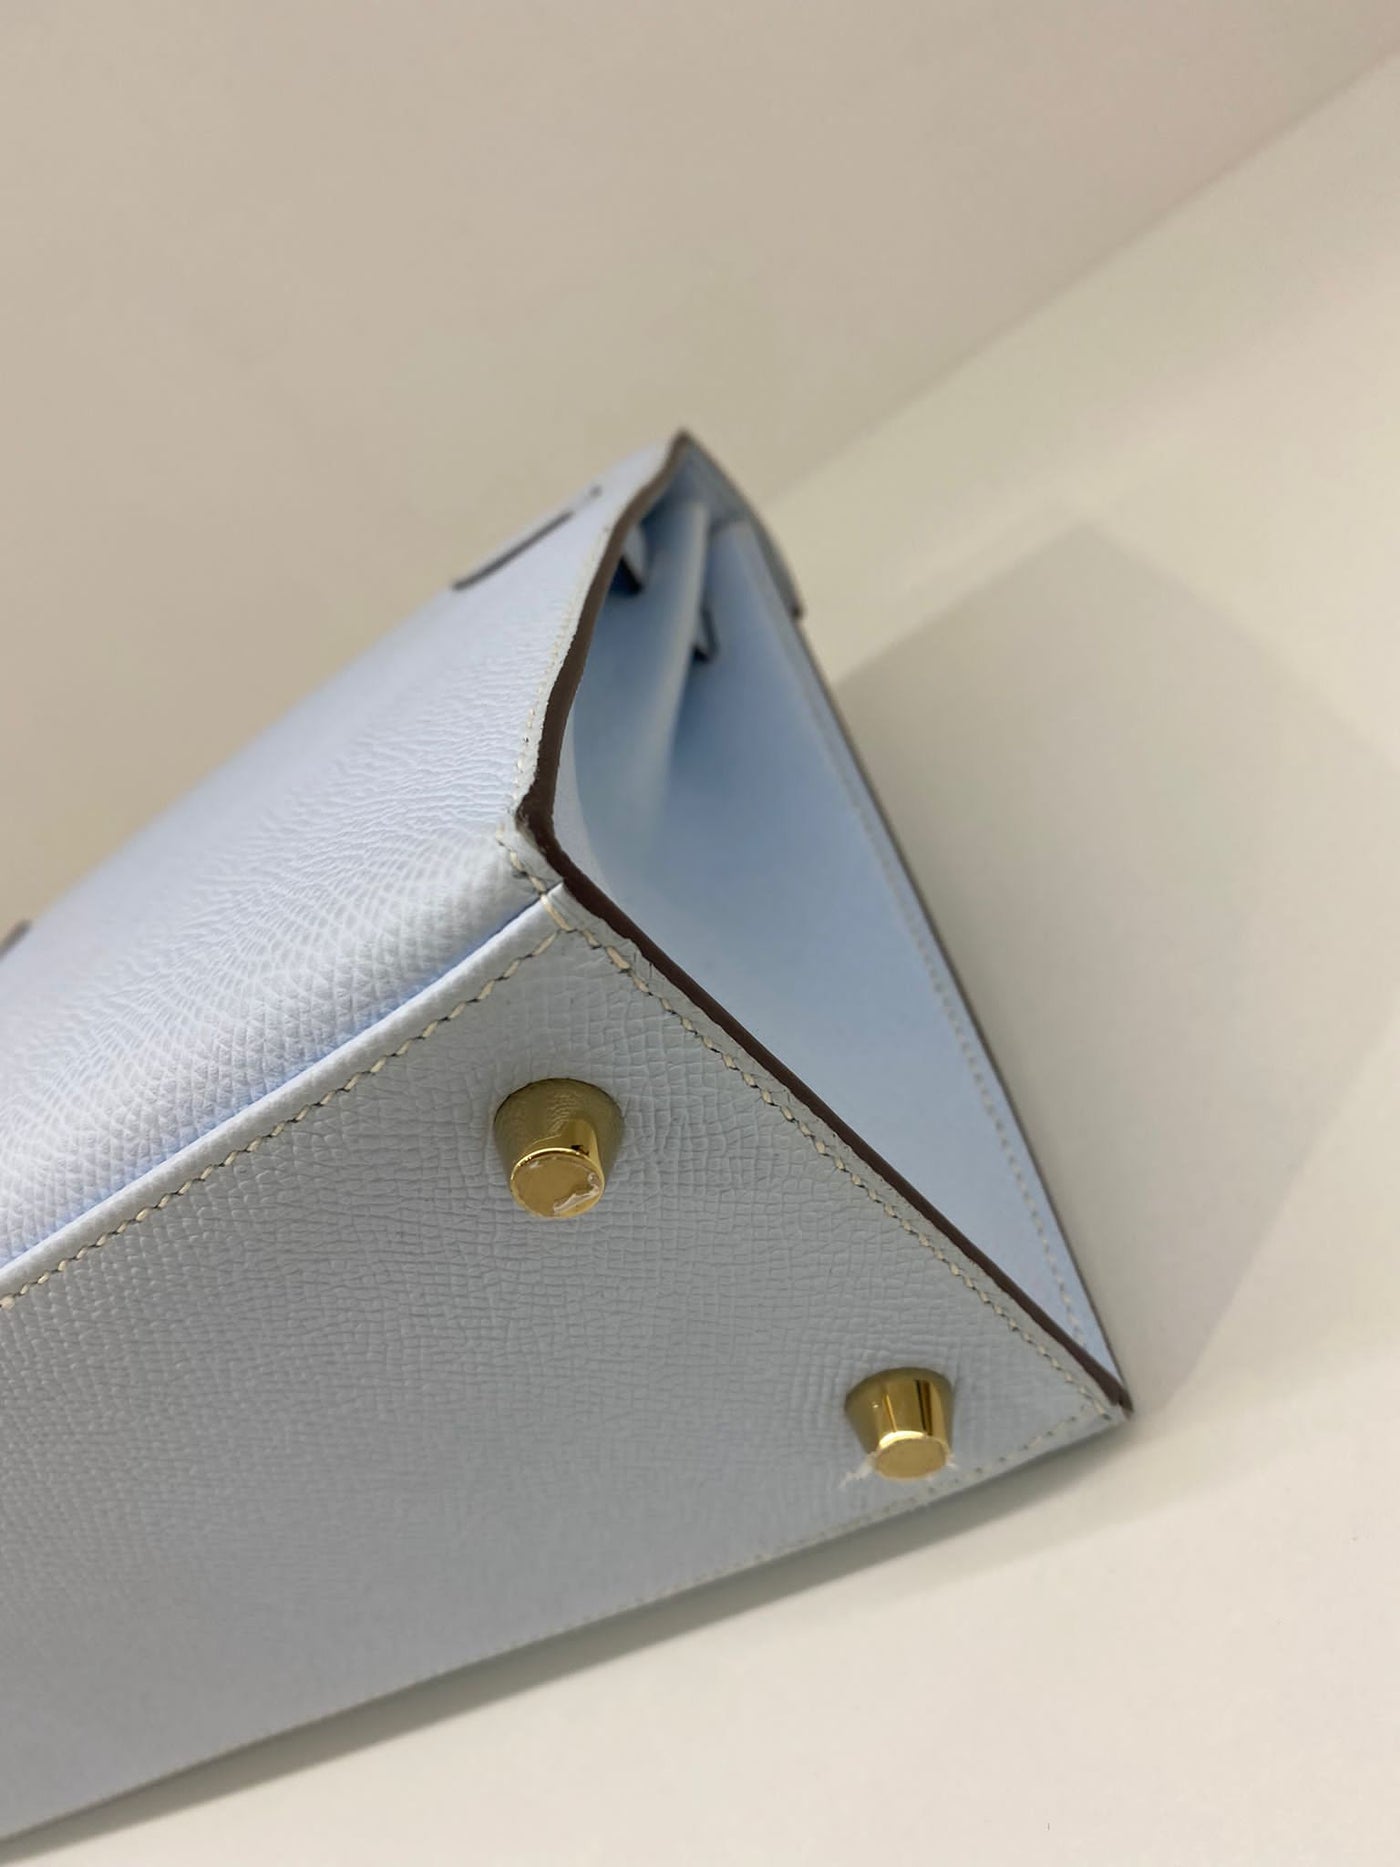 Hermes Kelly 25 Bleu Brume GHW - SOLD – PH Luxury Consignment